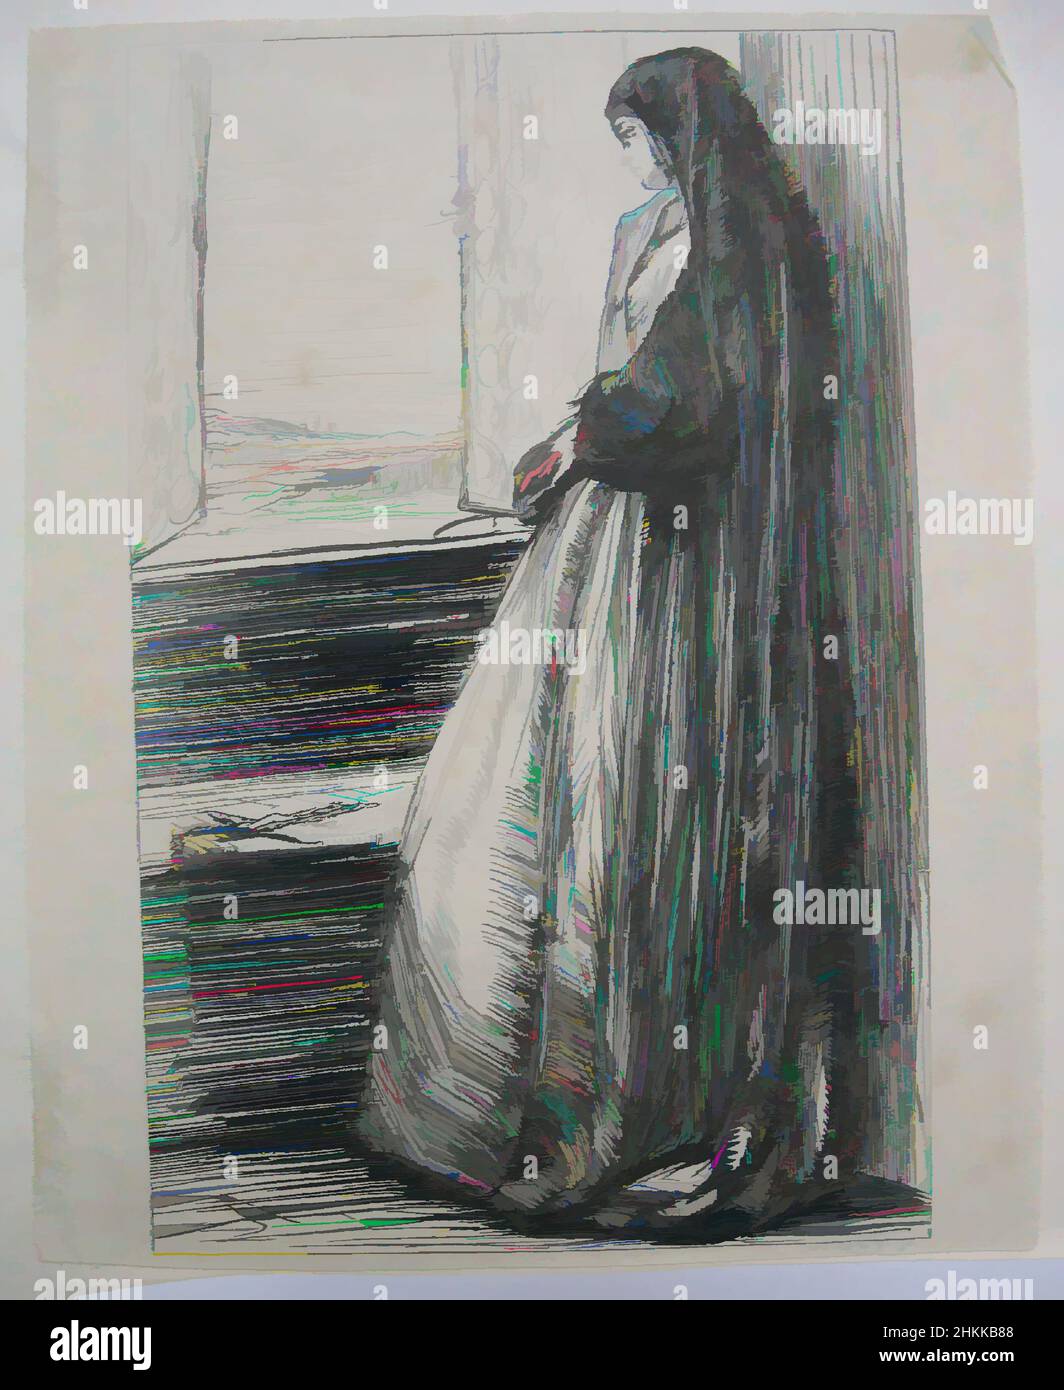 Art inspired by Count Burckhardt, James Abbott McNeill Whistler, American, 1834-1903, Wood engraving on Japan paper, n.d., Sheet: 6 7/16 x 5 1/8 in., 16.4 x 13 cm, Classic works modernized by Artotop with a splash of modernity. Shapes, color and value, eye-catching visual impact on art. Emotions through freedom of artworks in a contemporary way. A timeless message pursuing a wildly creative new direction. Artists turning to the digital medium and creating the Artotop NFT Stock Photo